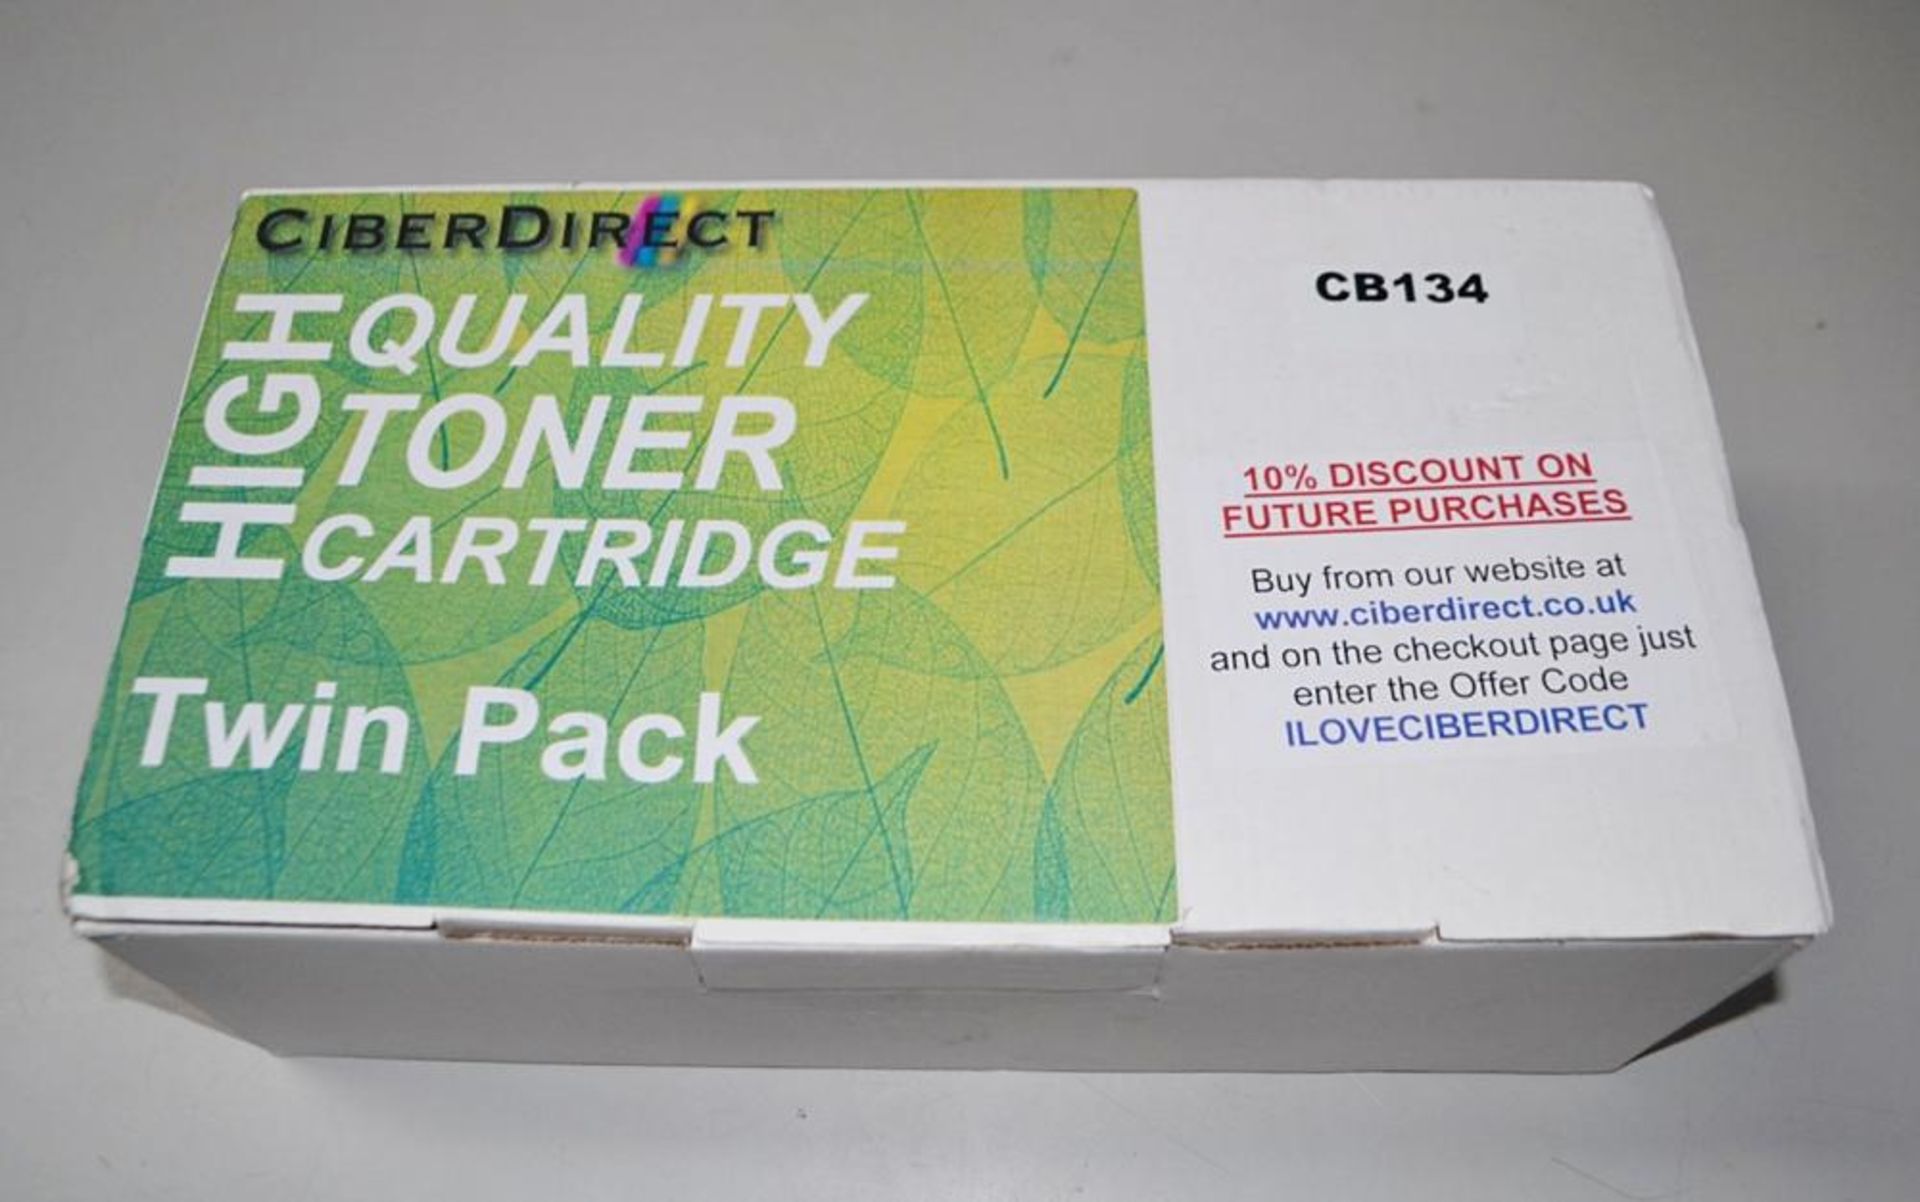 1 x Twin Pack CPT-CF283A Toner Cartridge In Black - Ref: CB134 - CL425 - Location: Altrincham WA14 - Image 3 of 6